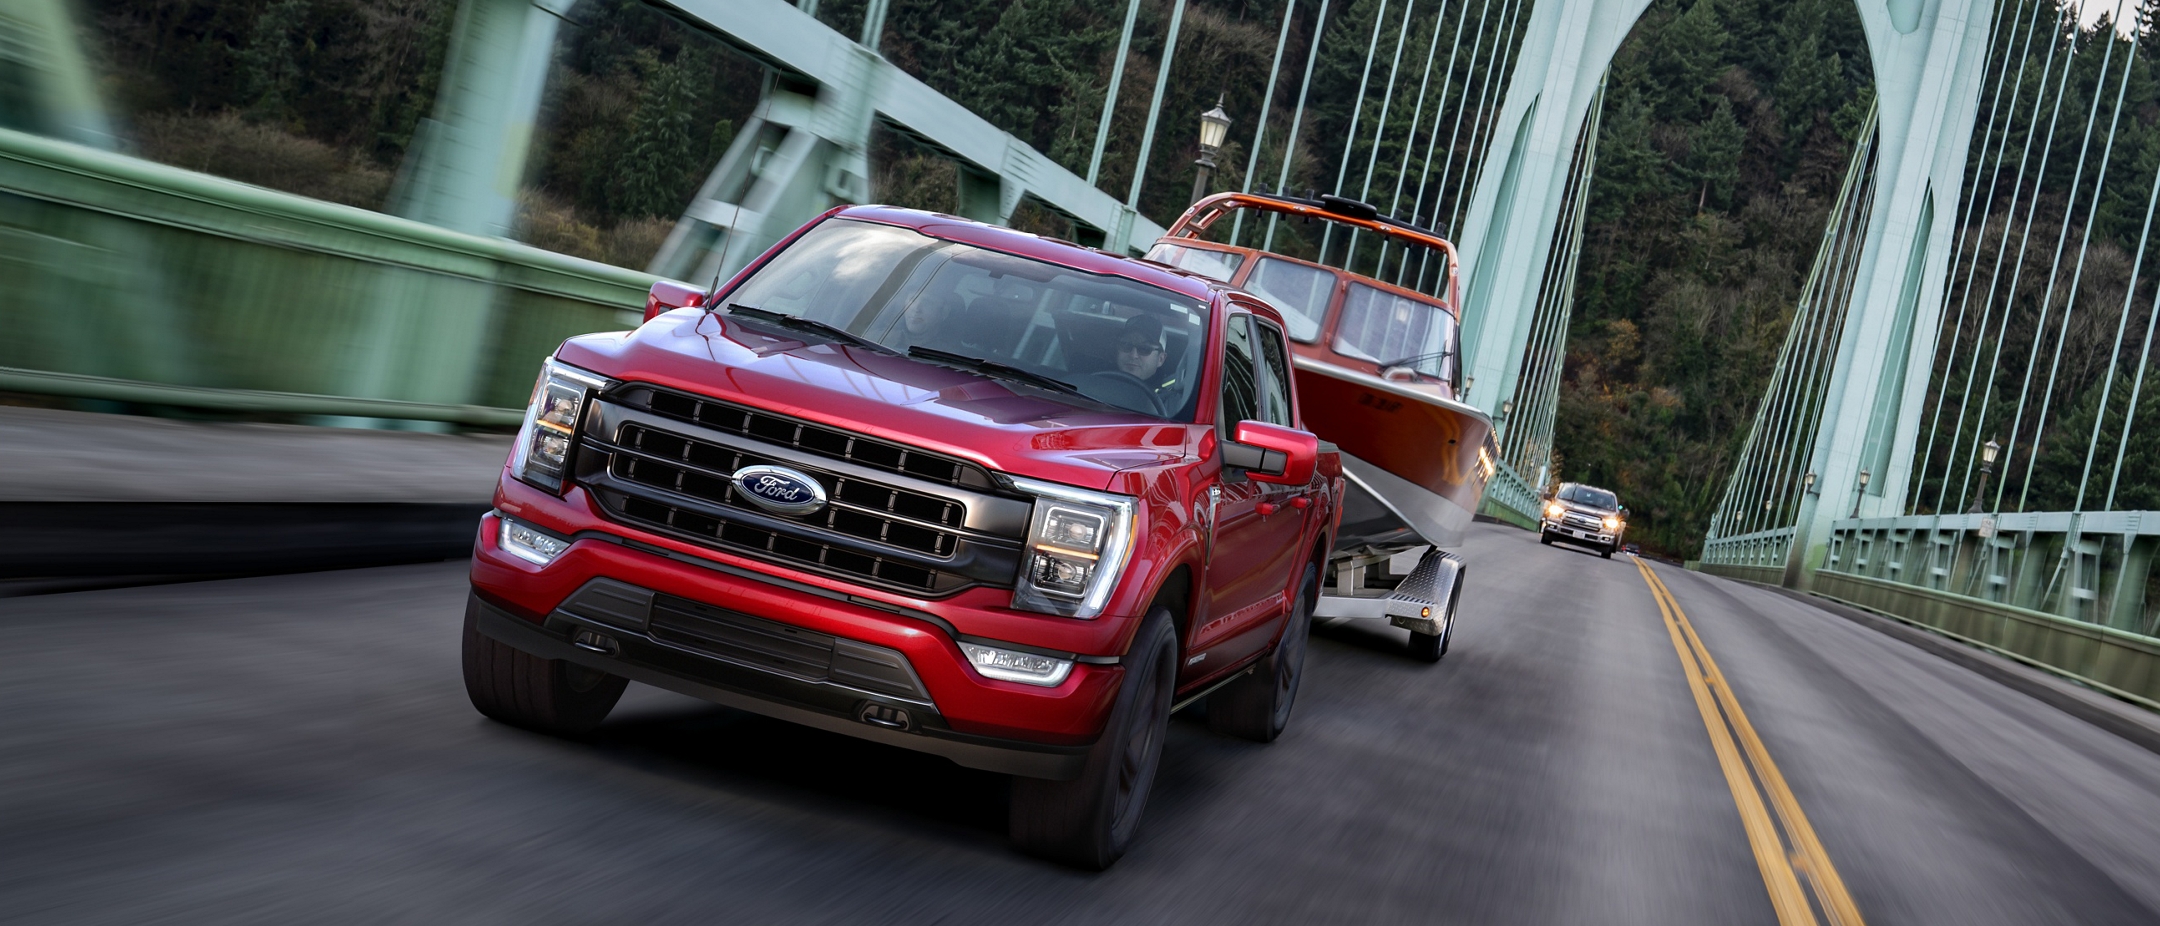 202 Ford F150 Towing Capability Boat Boerne TX